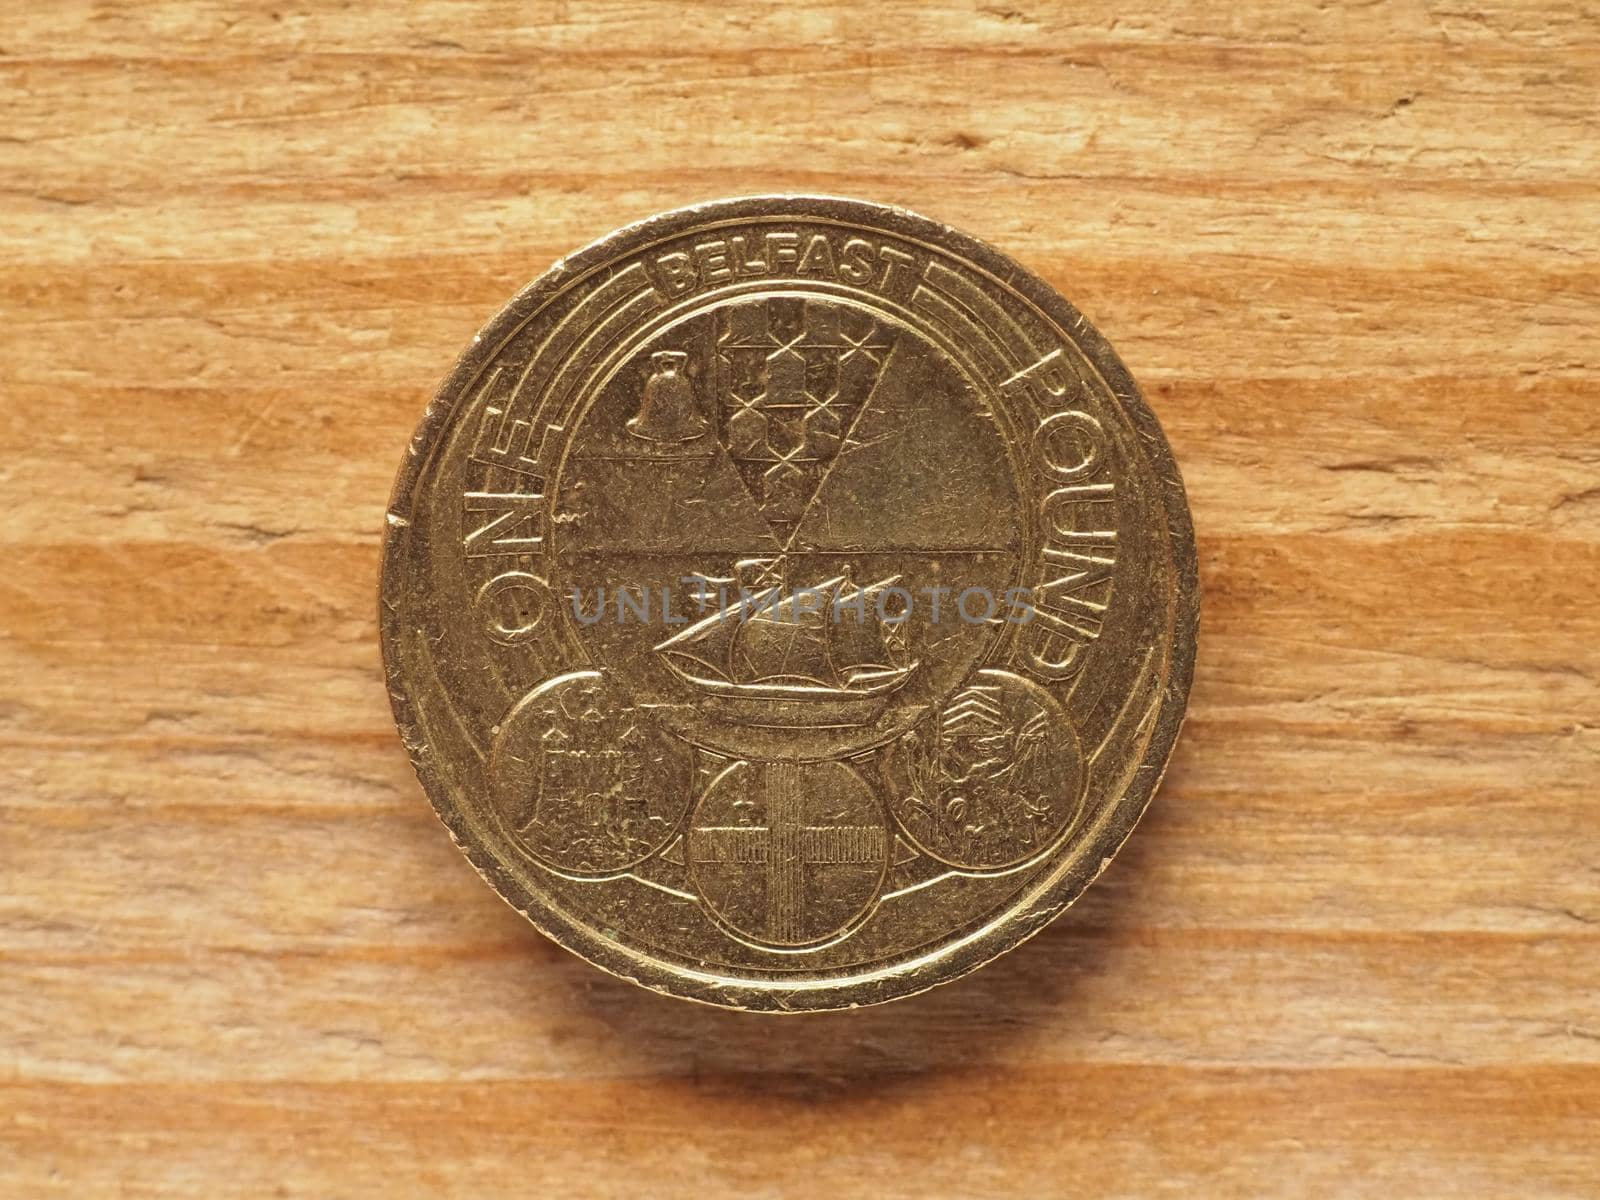 1 Pound coin, reverse side showing badge of Belfast, currency of the UK by claudiodivizia